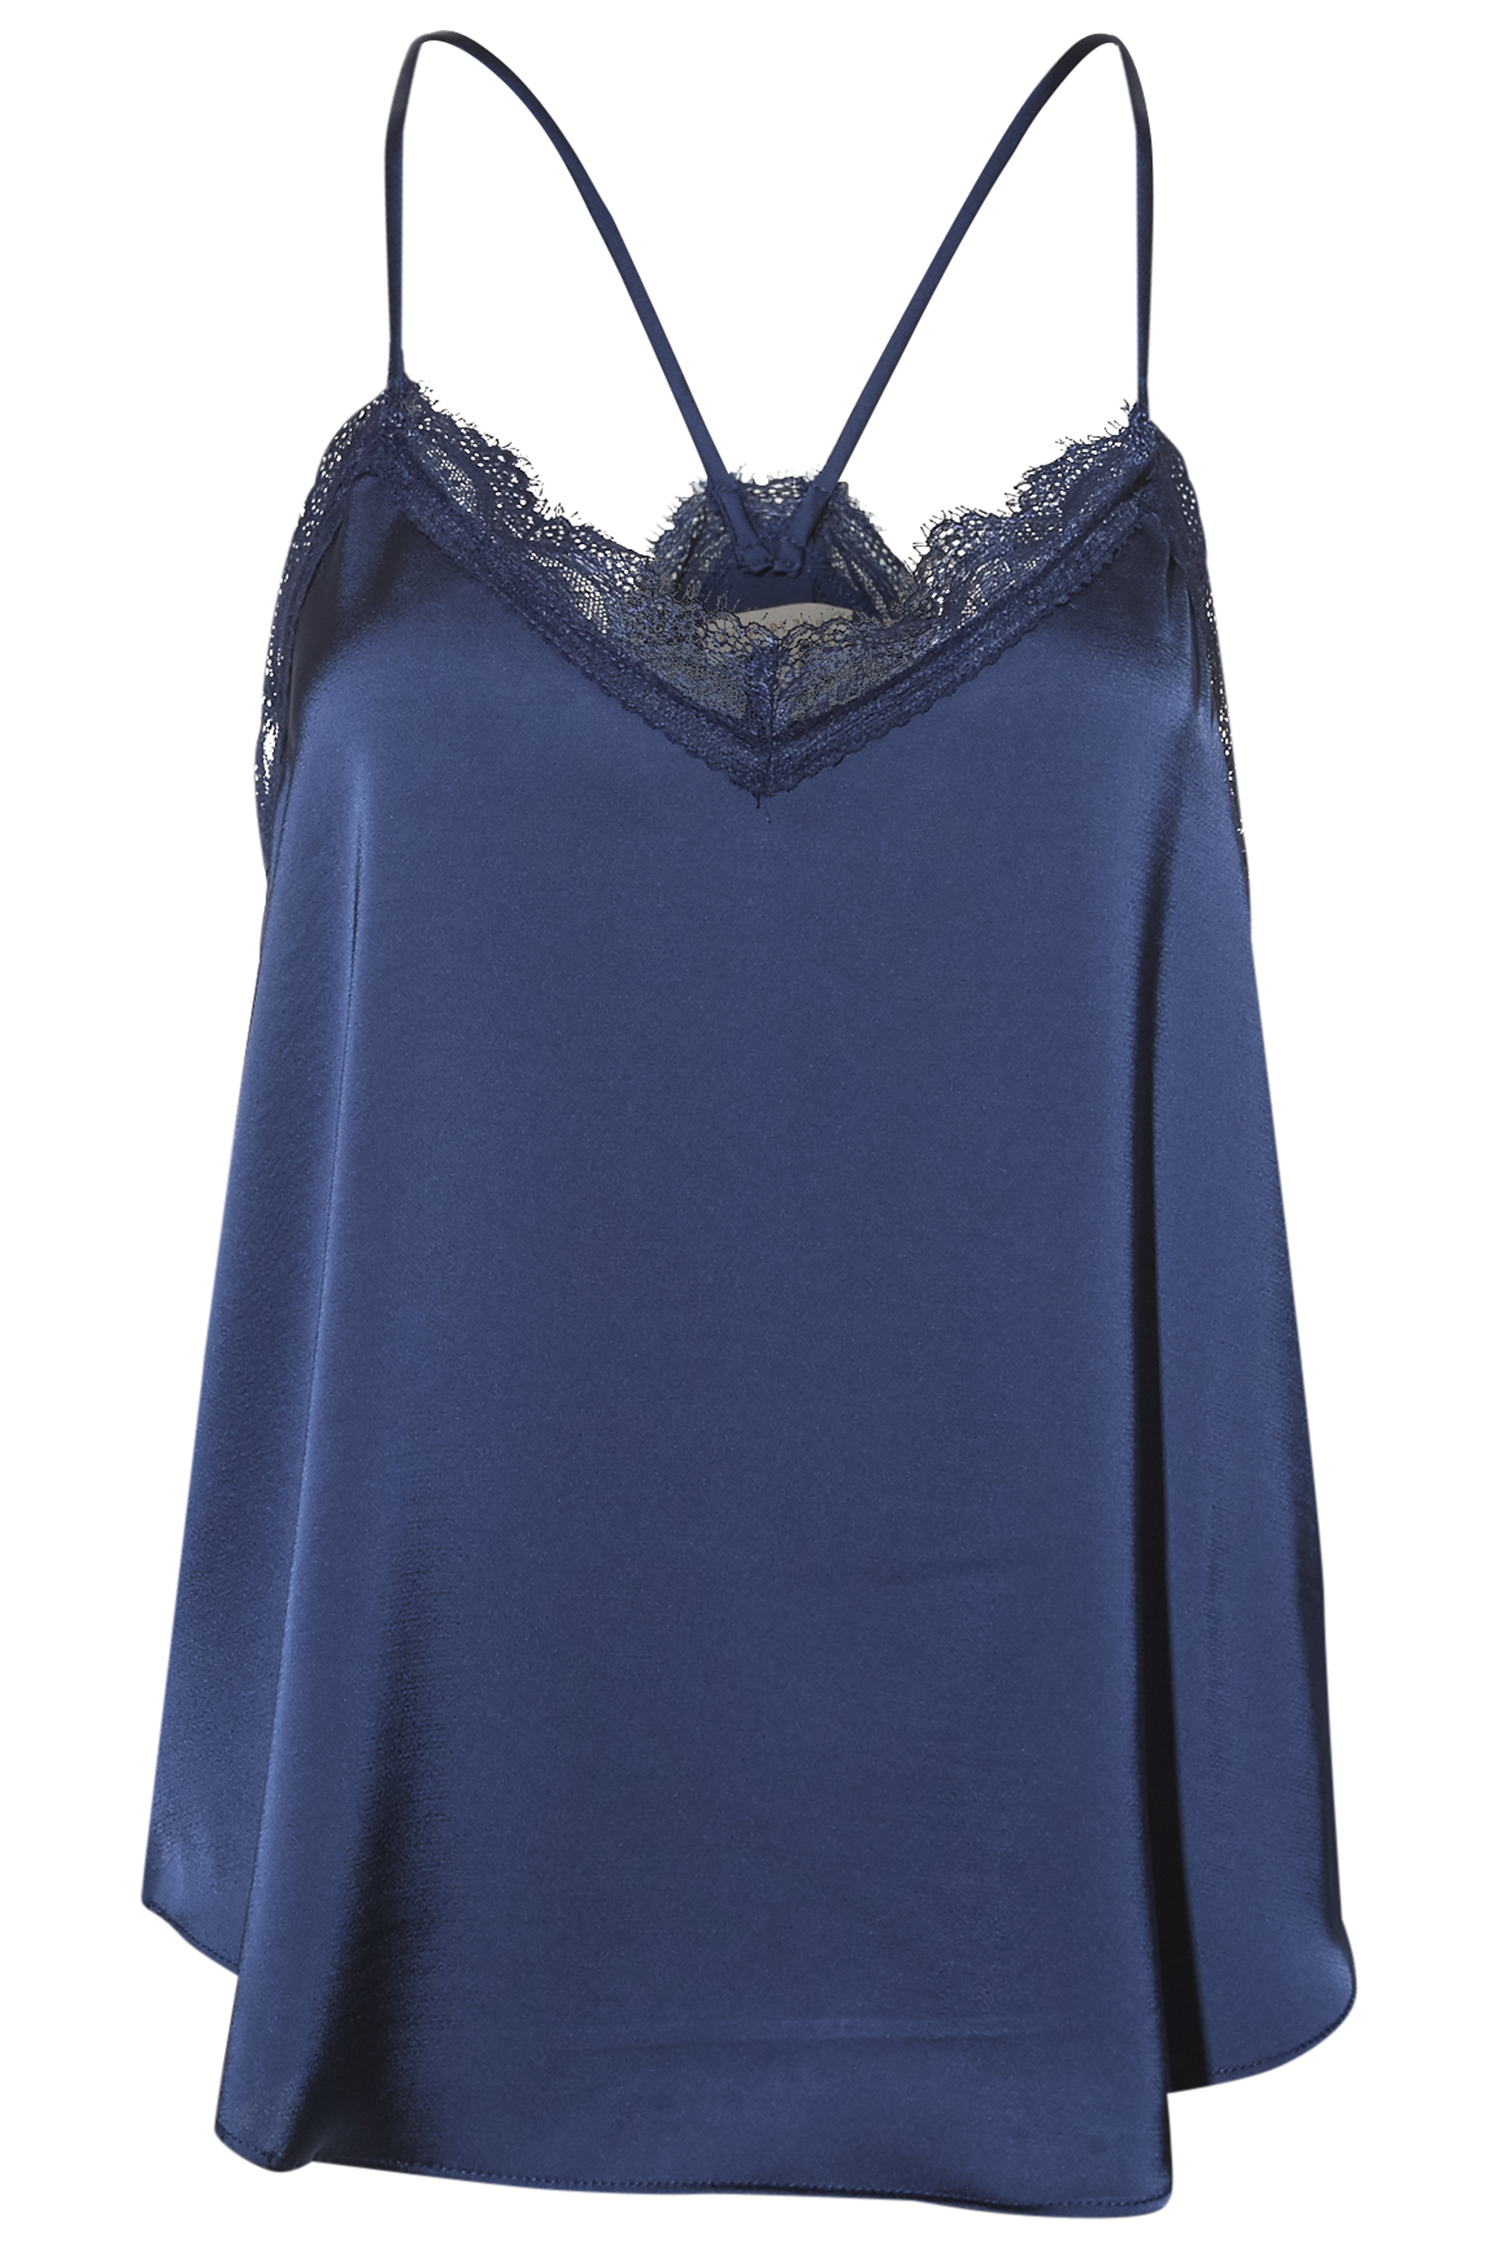 Skies Are Blue Lace Trim Cami